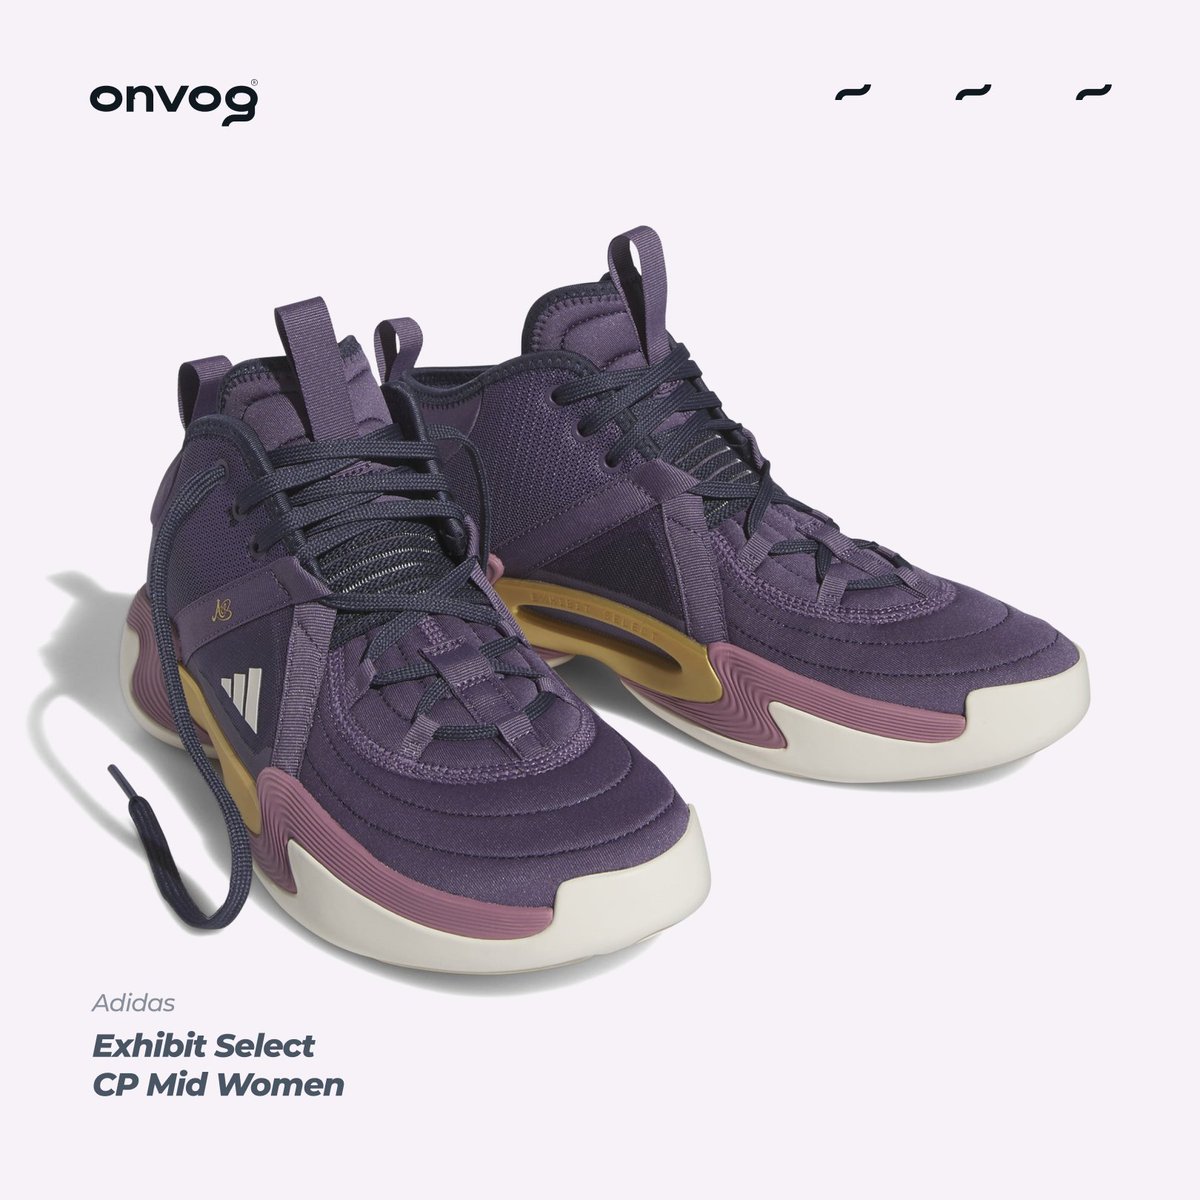 Step up your game with the Adidas Exhibit Select CP Mid for Women (IE9338)! Get your pair now at onvog.com or visit us at onvog.com/map #ONVOG #Adidas #ExhibitSelect #WomenFitness